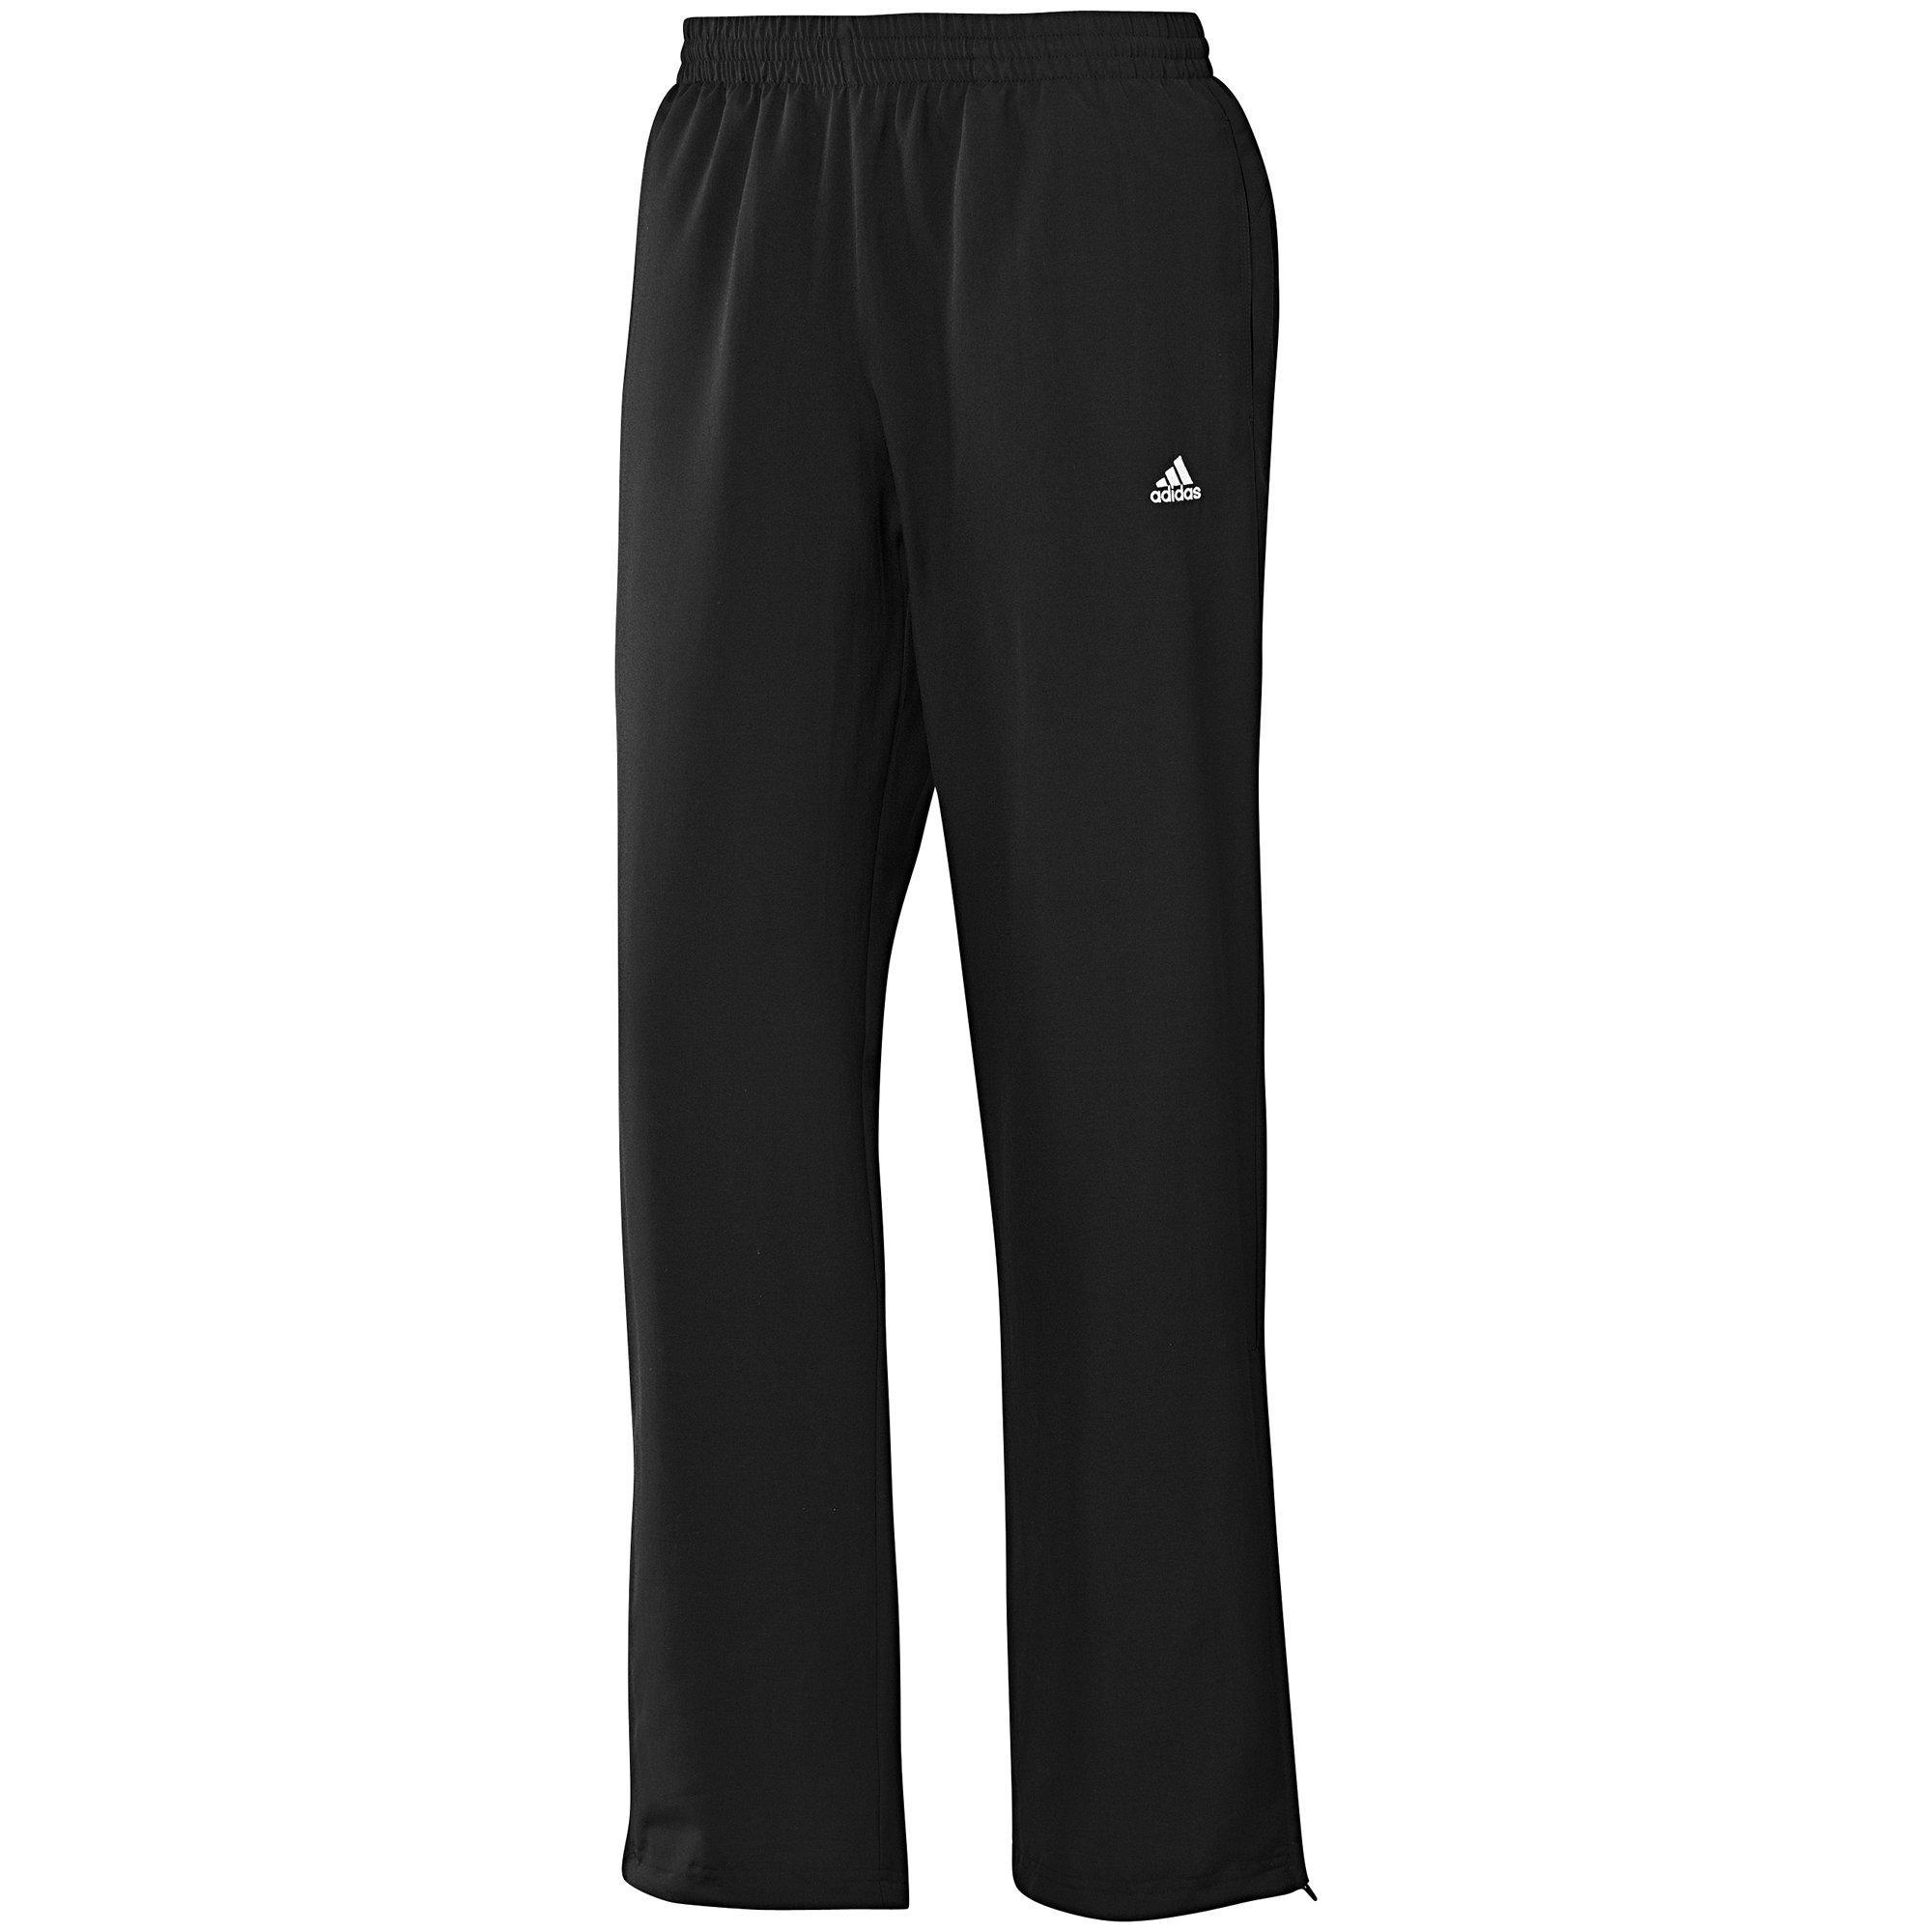 adidas stanford trousers